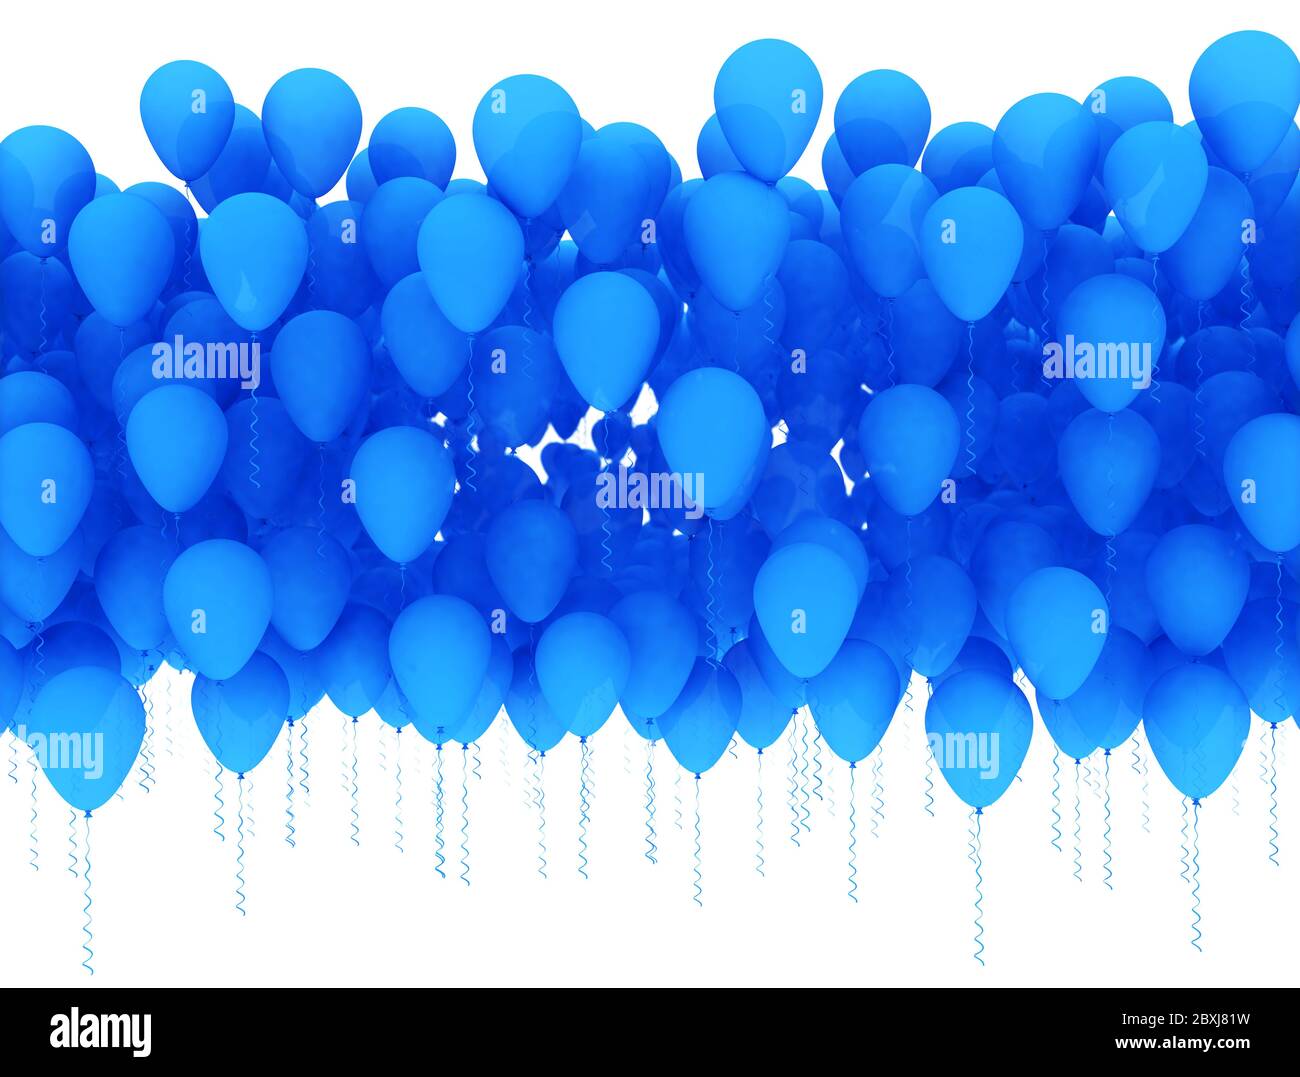 Blue balloons floating isolated on white background. 3D render Stock Photo